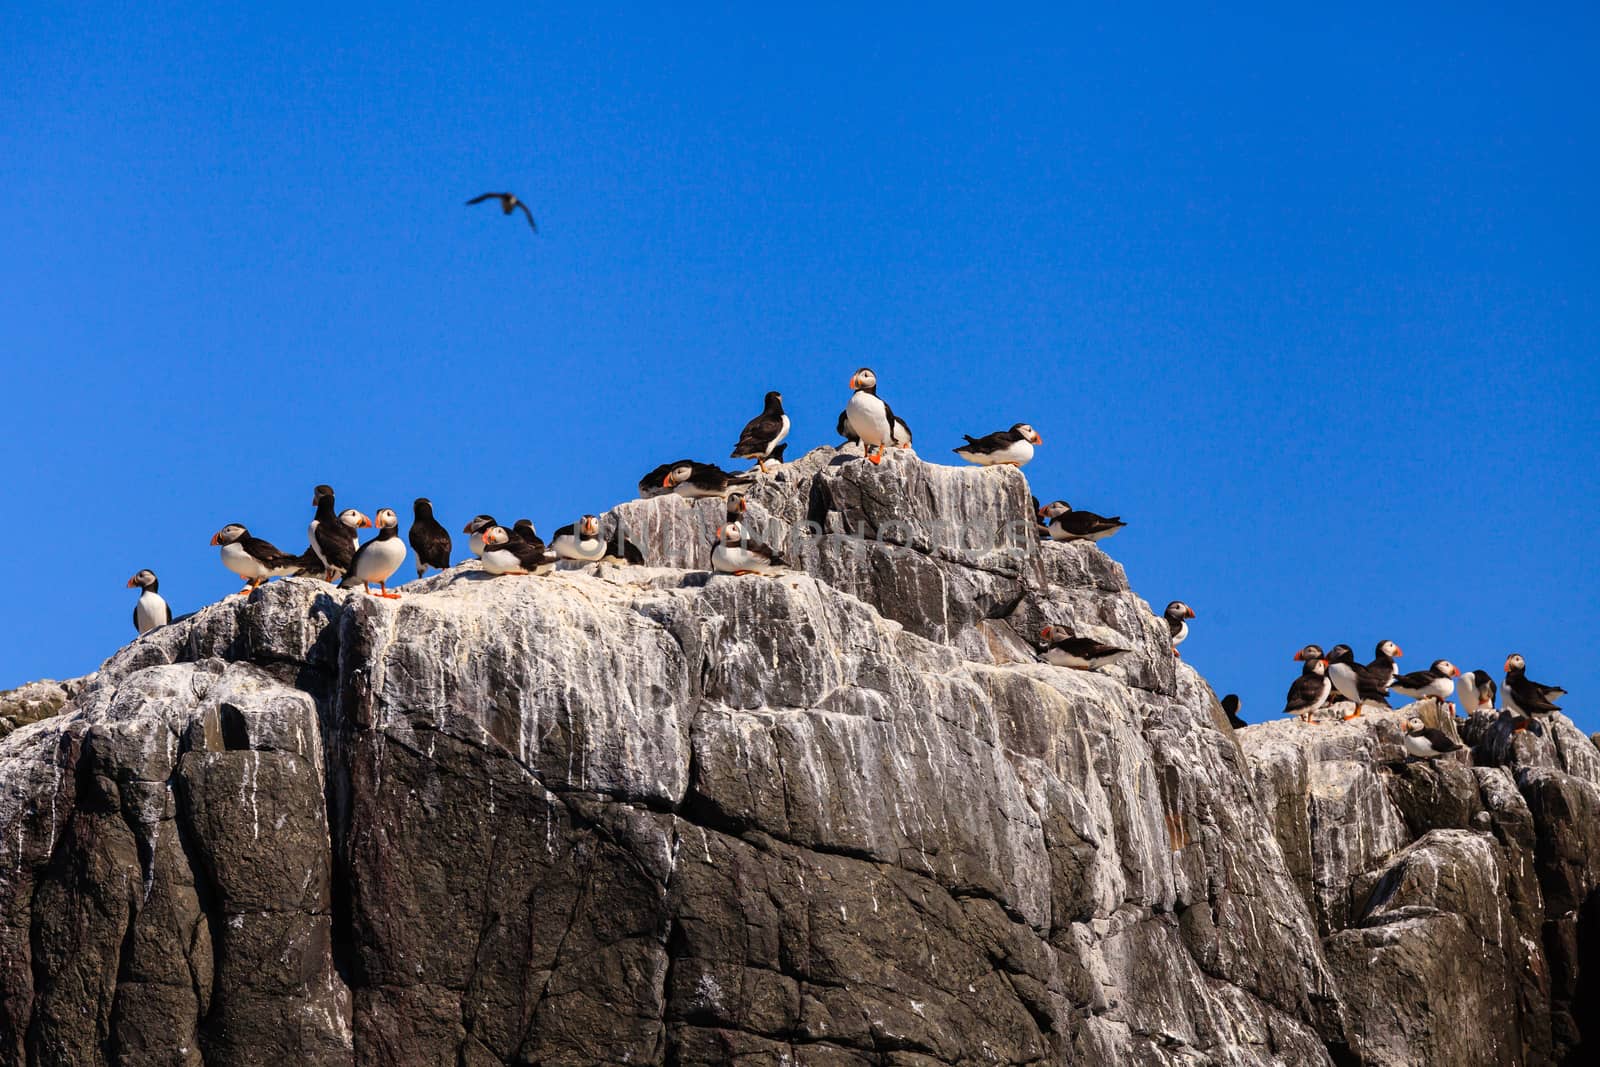 Puffins nesting on the cliffs of the Farne Islands off the coast of Northumberland in North East England.